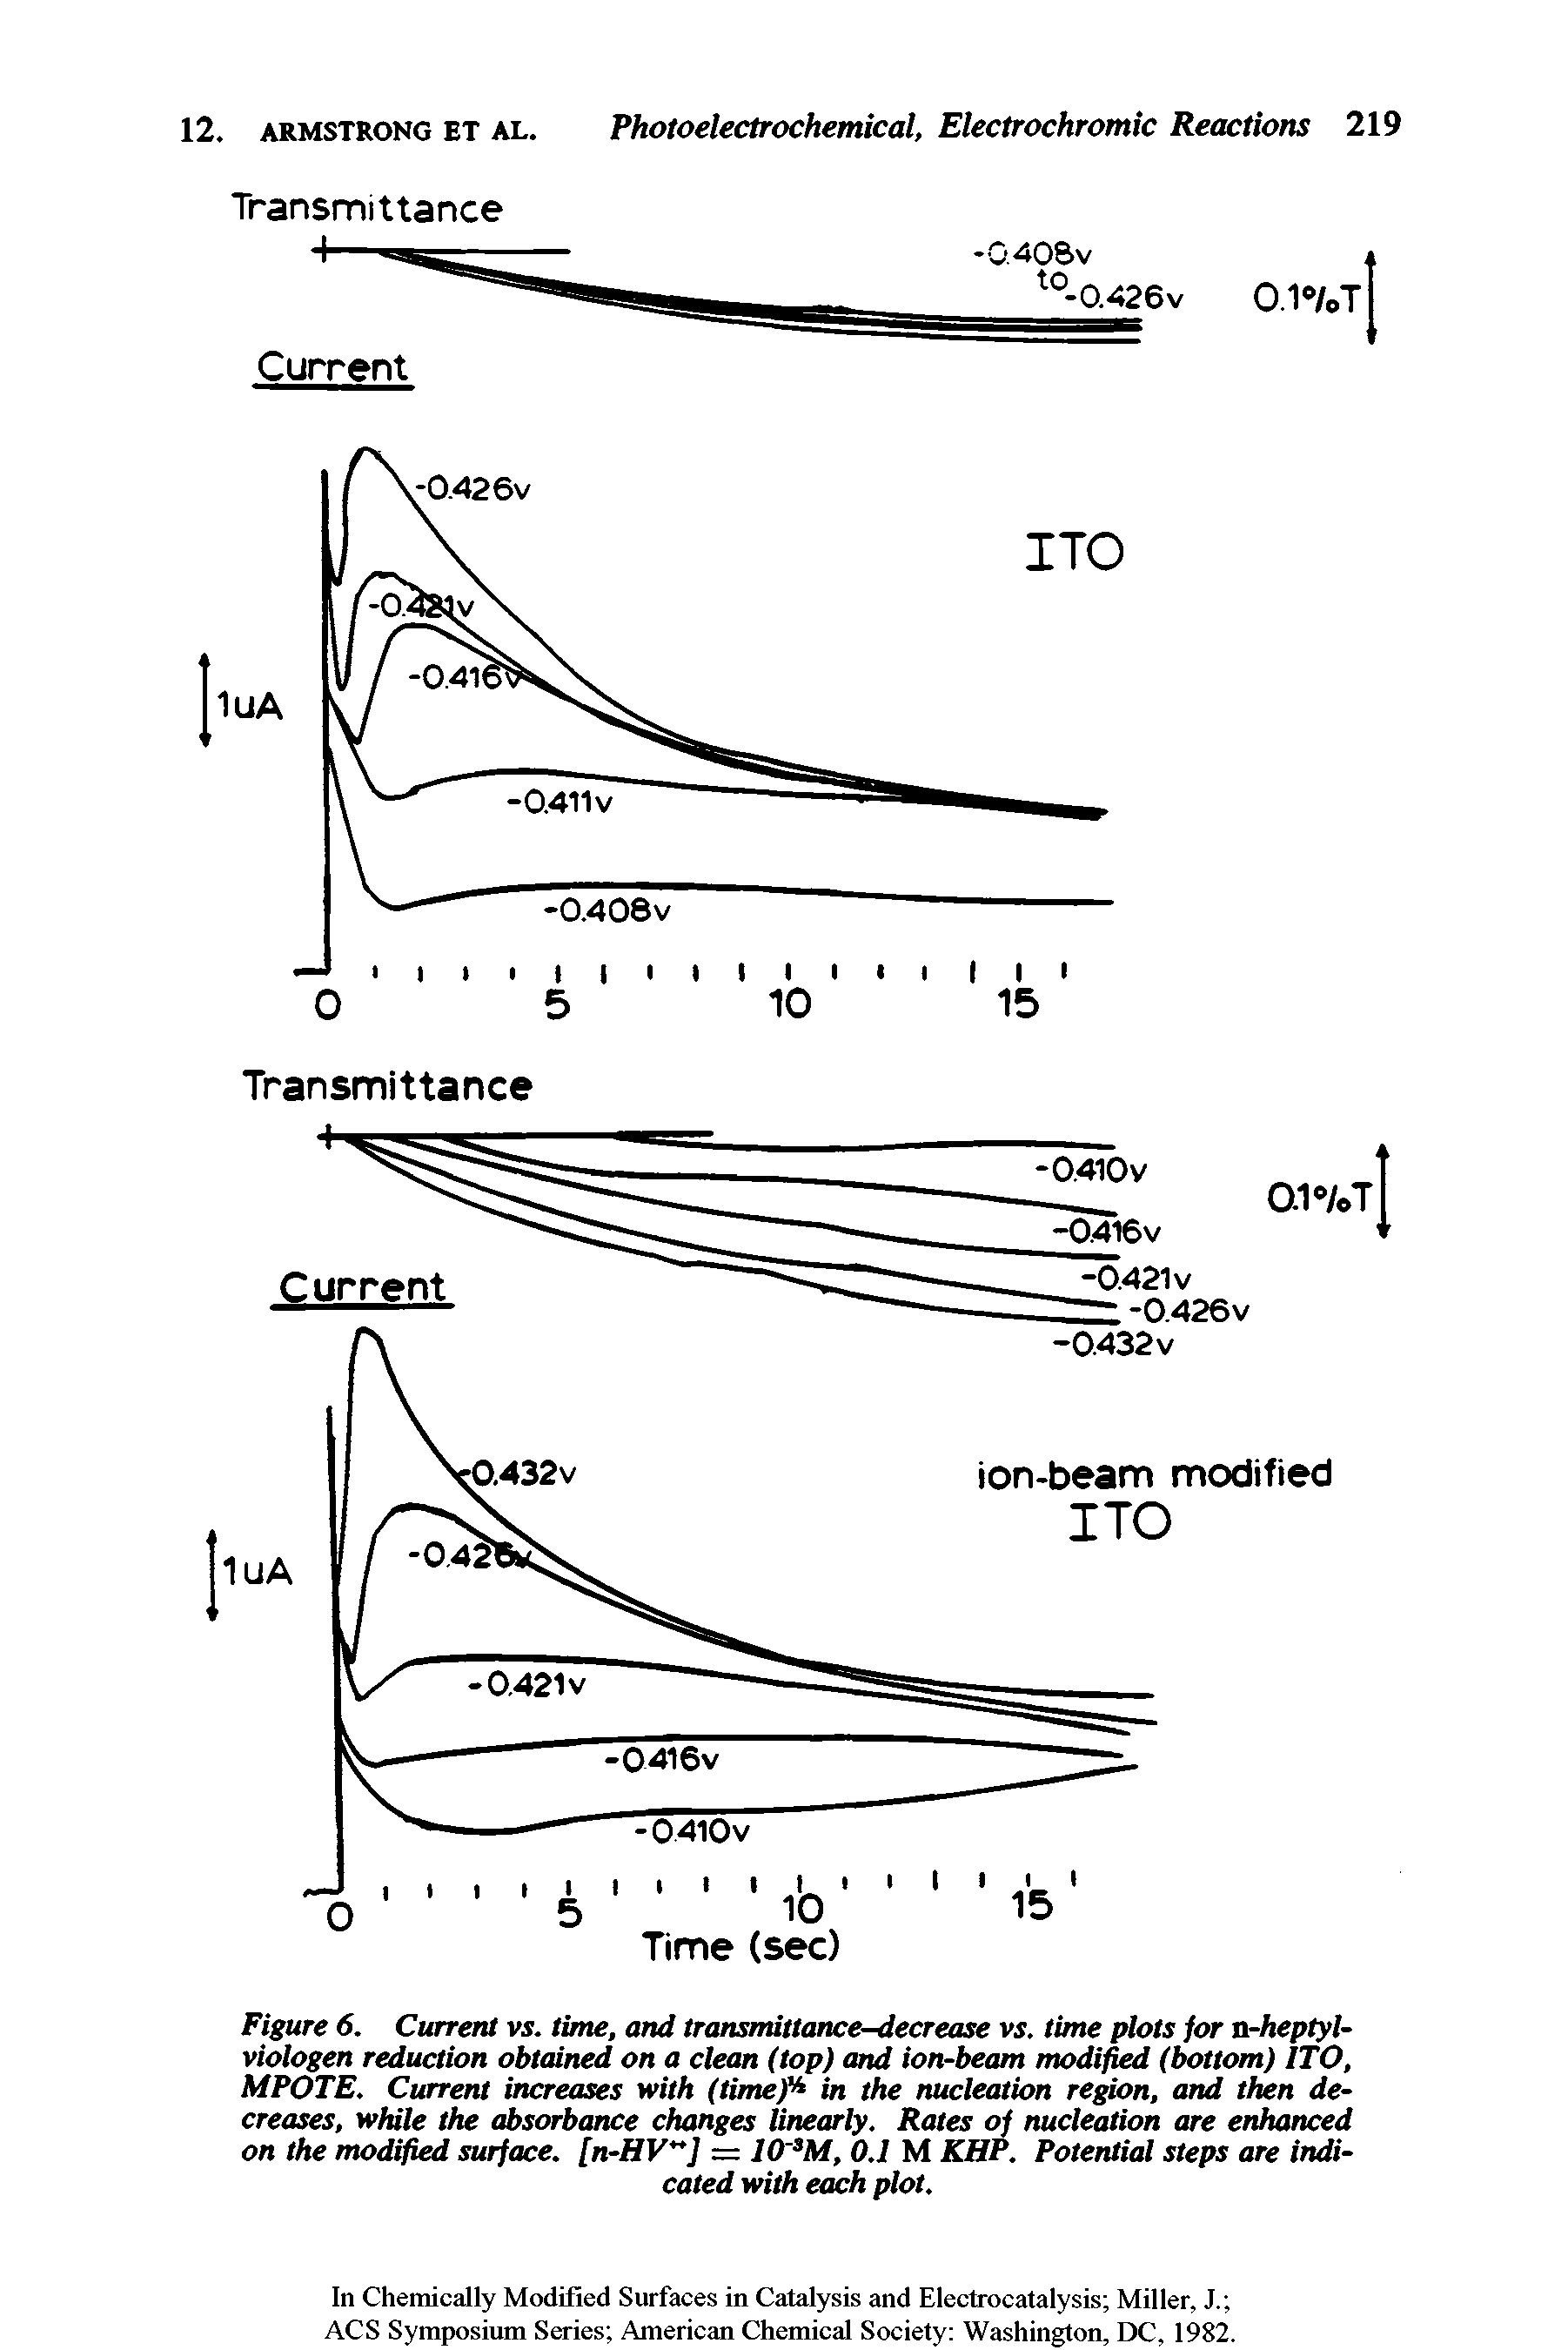 Figure 6. Current vs. time, and transmittance-decrease vs. time plots for n-heptyl-viologen reduction obtained on a clean (top) and ion-beam modified (bottom) ITO, MPOTE. Current increases with (tinted in the nucleation region, and then decreases, while the absorbance changes linearly. Rates of nucleation are enhanced on the modified surface. [n-HV ] = 10 3M, 0.1 M KHP. Potential steps are indicated with each plot.